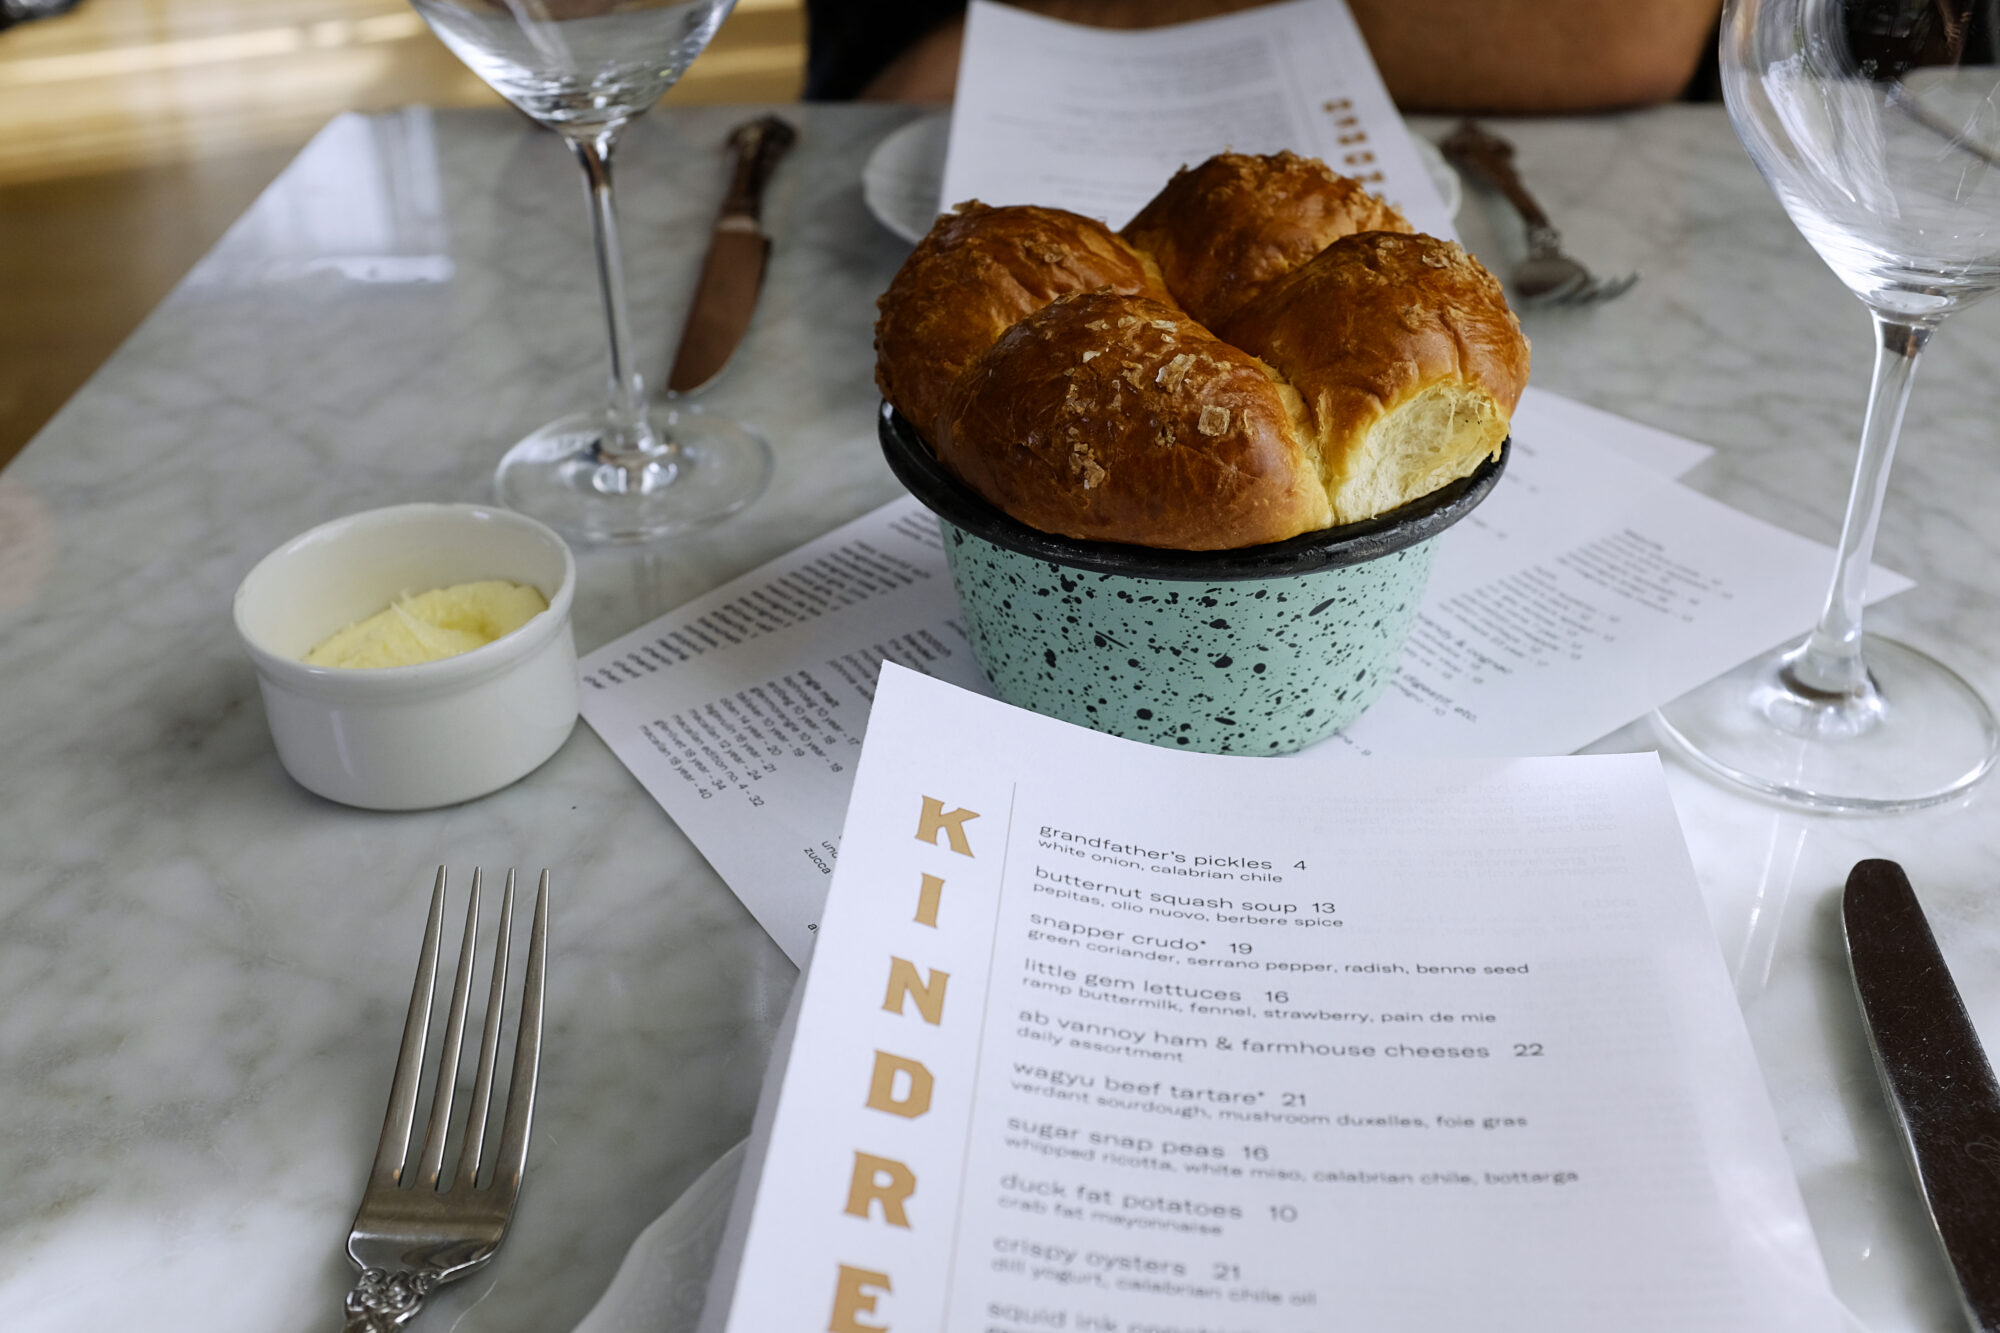 A loaf of Milkbread on the table at Kindred